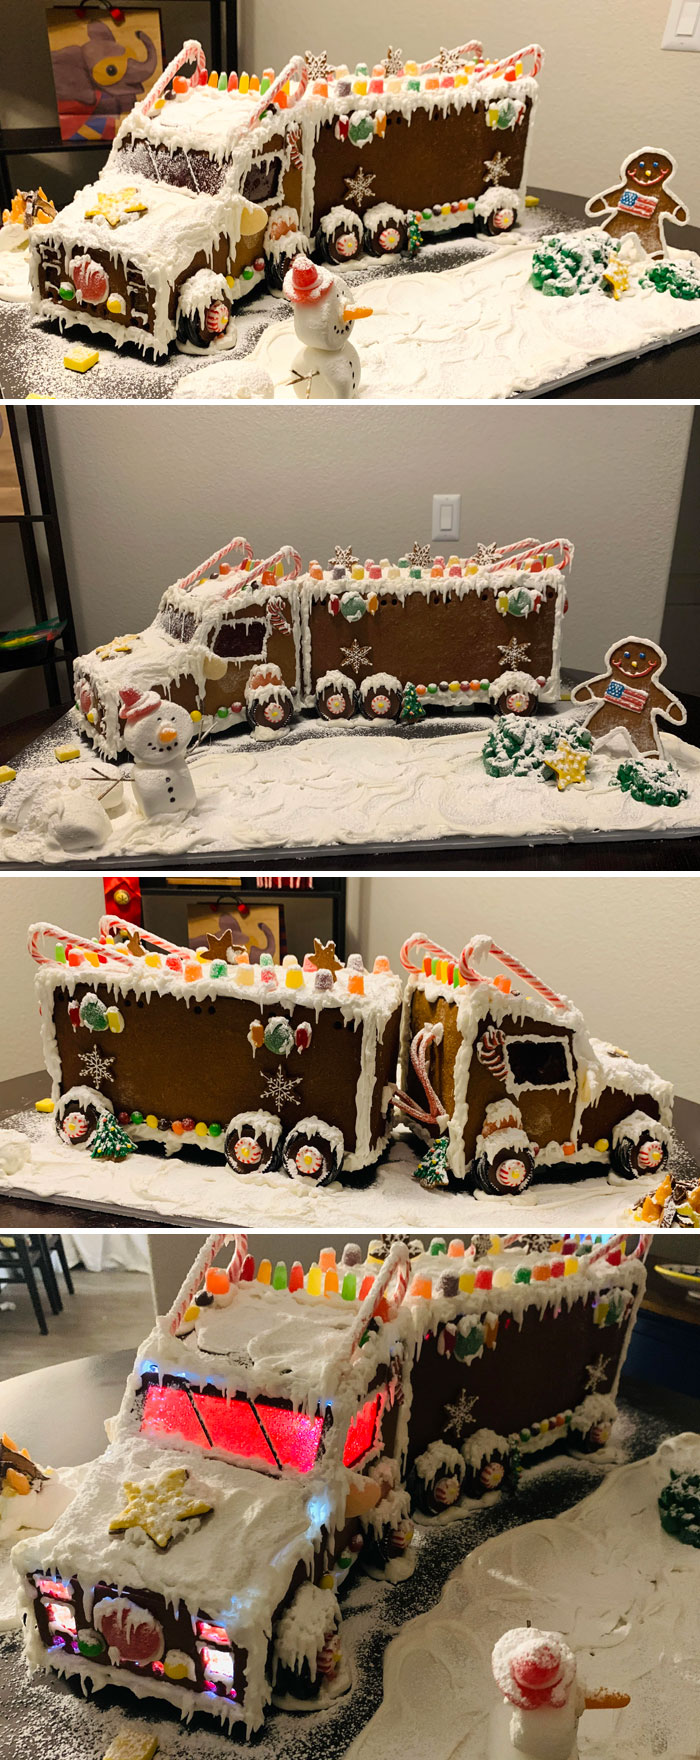 I Made From Scratch A Gingerbread Semi Truck For A Friend. Though Y’all Would Like It. We Appreciate You! Merry Christmas And Stay Safe